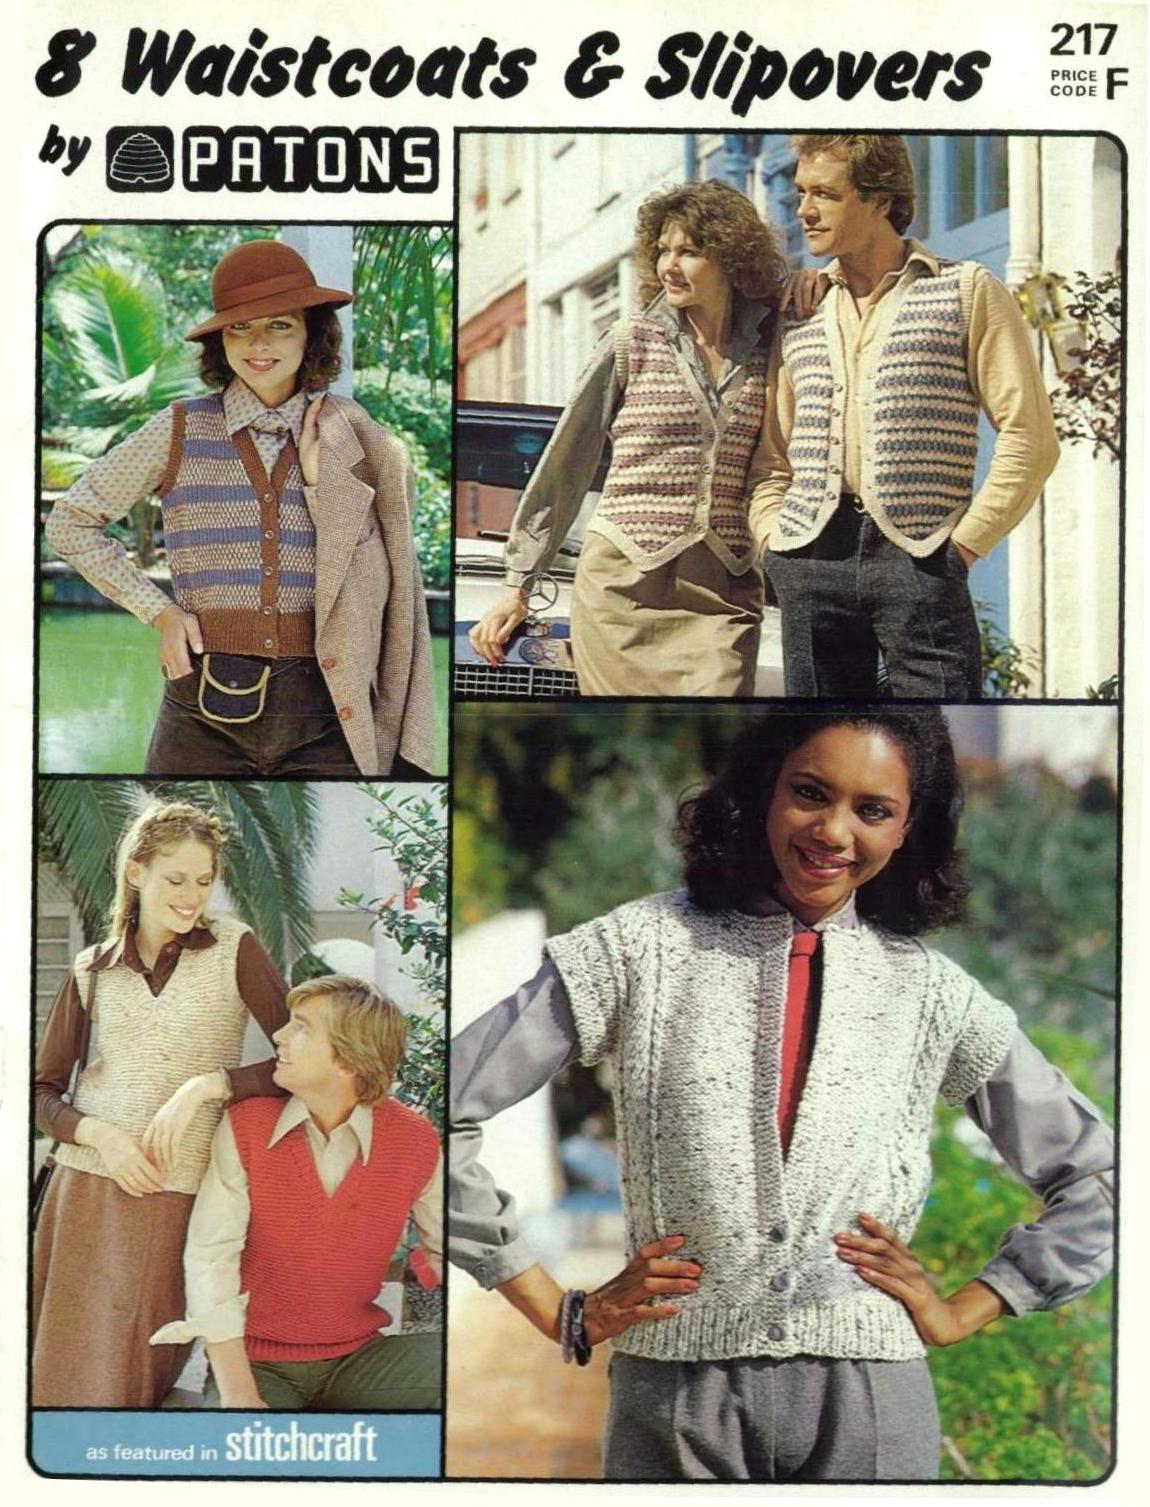 Cover of Patons 217 - Waistcoats and Slipovers. Assorment of male and female models wearing sleeveless cardigans and jumpers in striped, stranded and textured knitting.